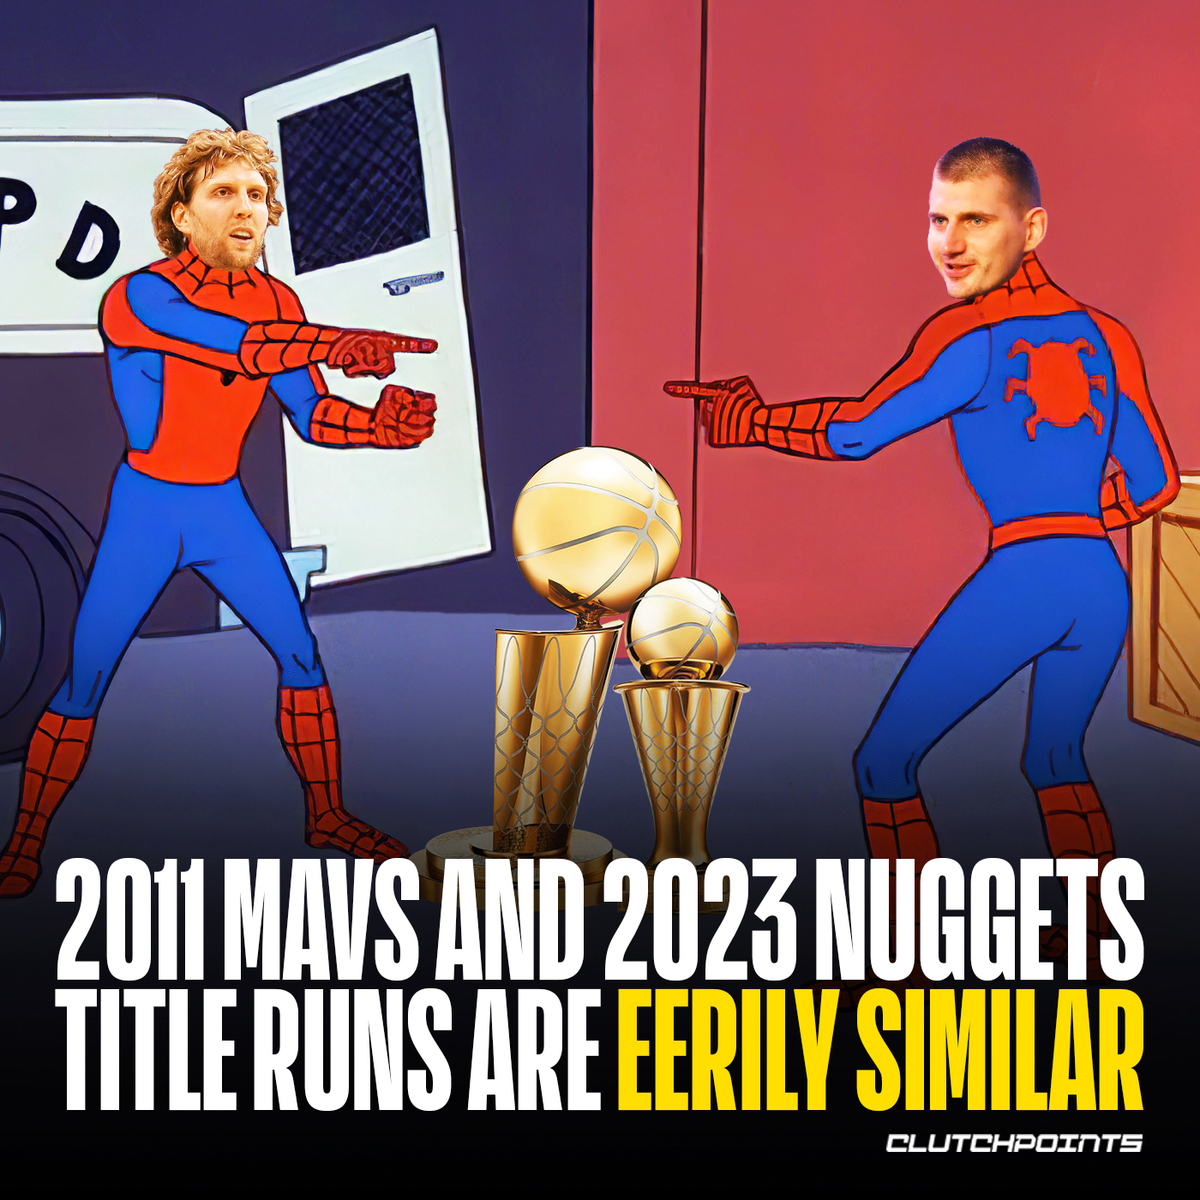 2011 Mavs & 2023 Nuggets' title runs:

🔸 Both led by a European star
🔸 Both with 0 All-Star teammates
🔸 Both beat Kevin Durant 
🔸 Both swept the Lakers
🔸 Both beat the Heat in the Finals
🔸 Both teams' first Championship

The NBA must've hired the 2011 playoffs scriptwriters…